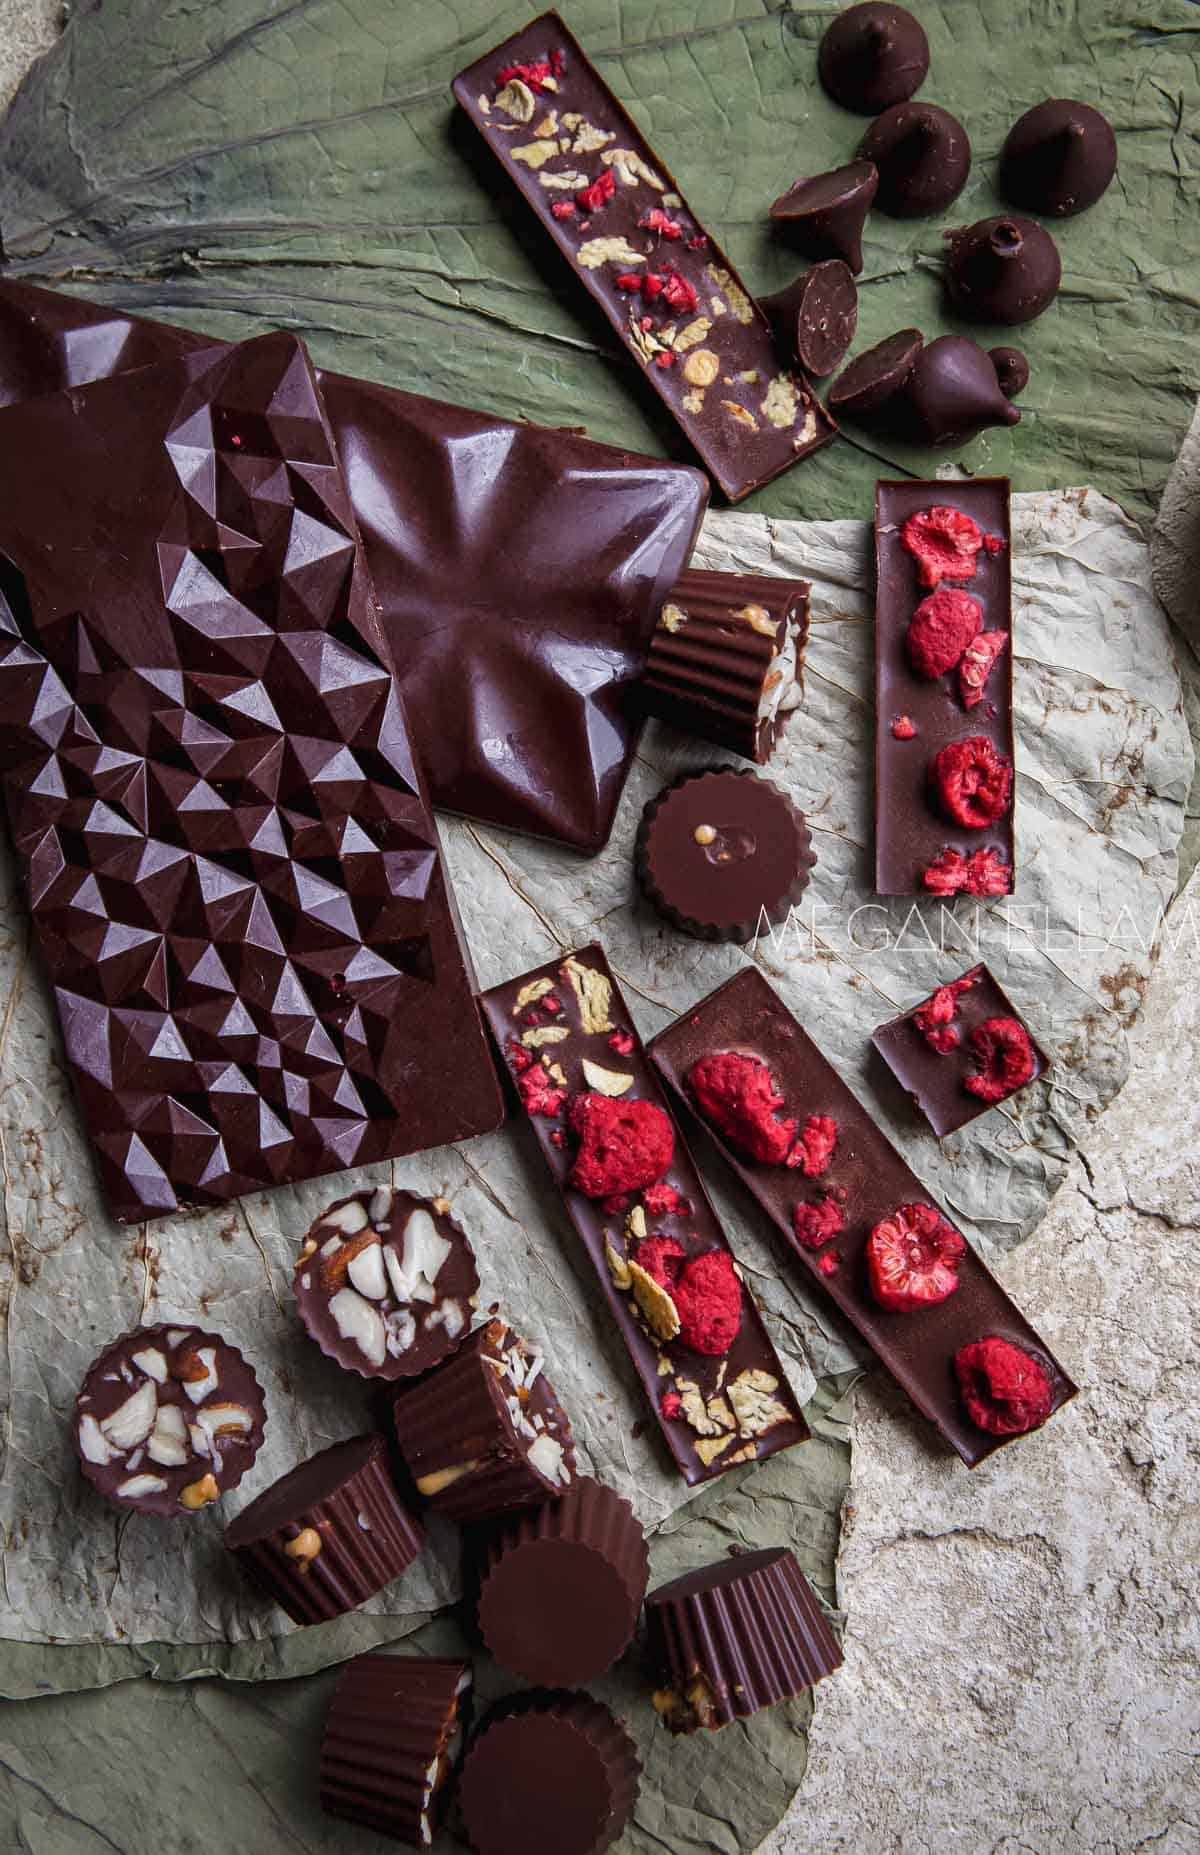 A range of chocolates on a natural fauna background.